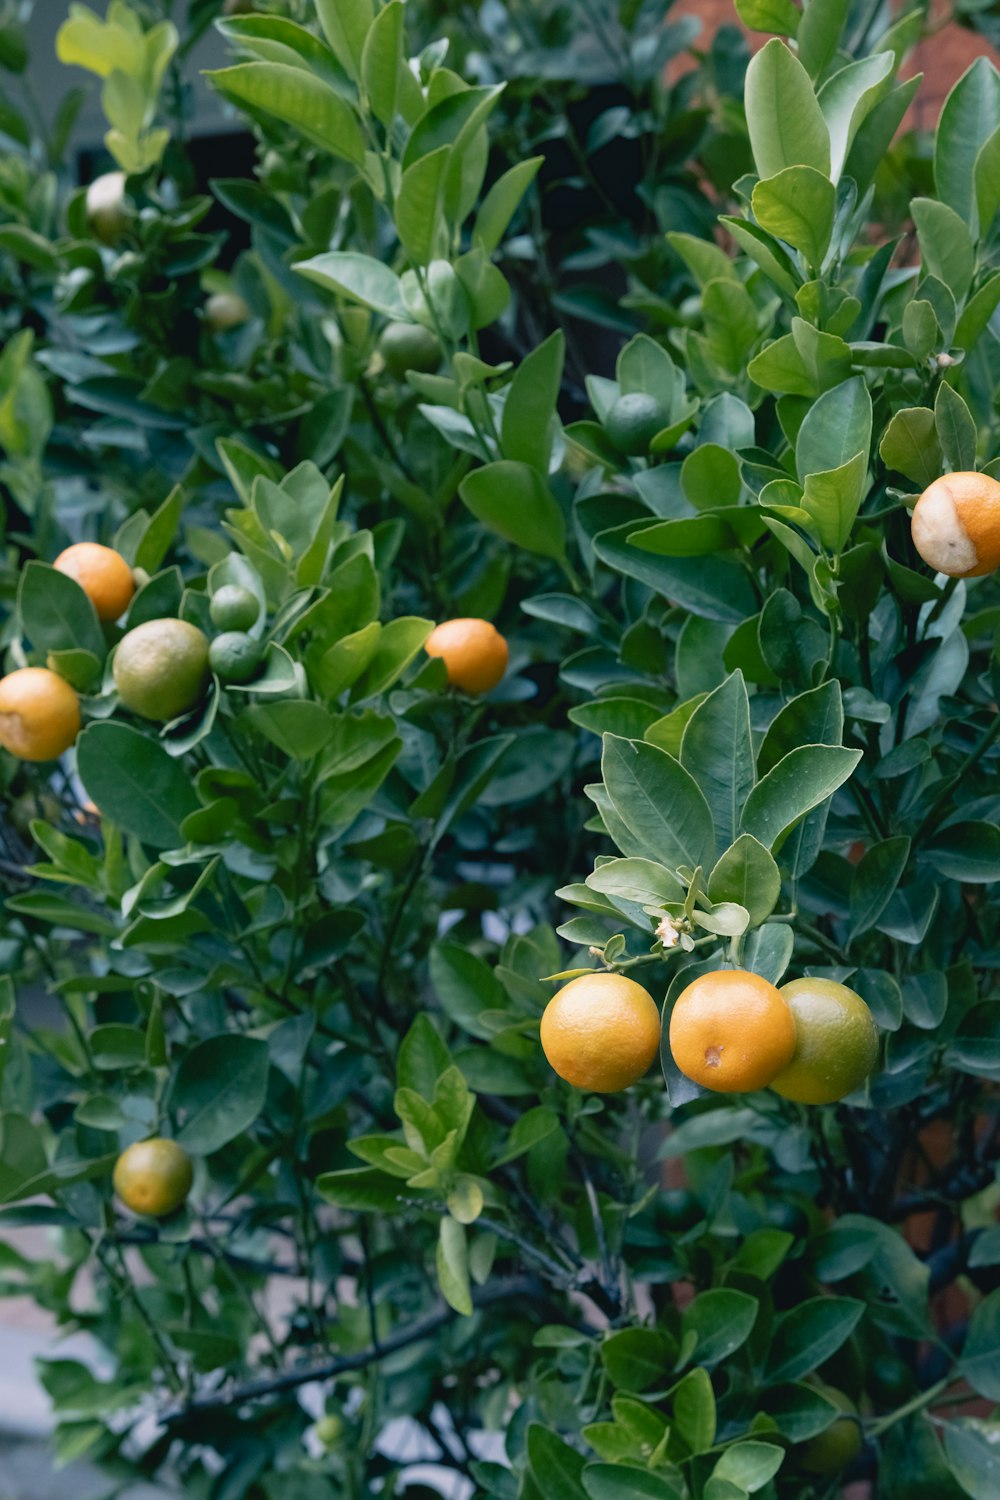 oranges growing on a tree in a garden